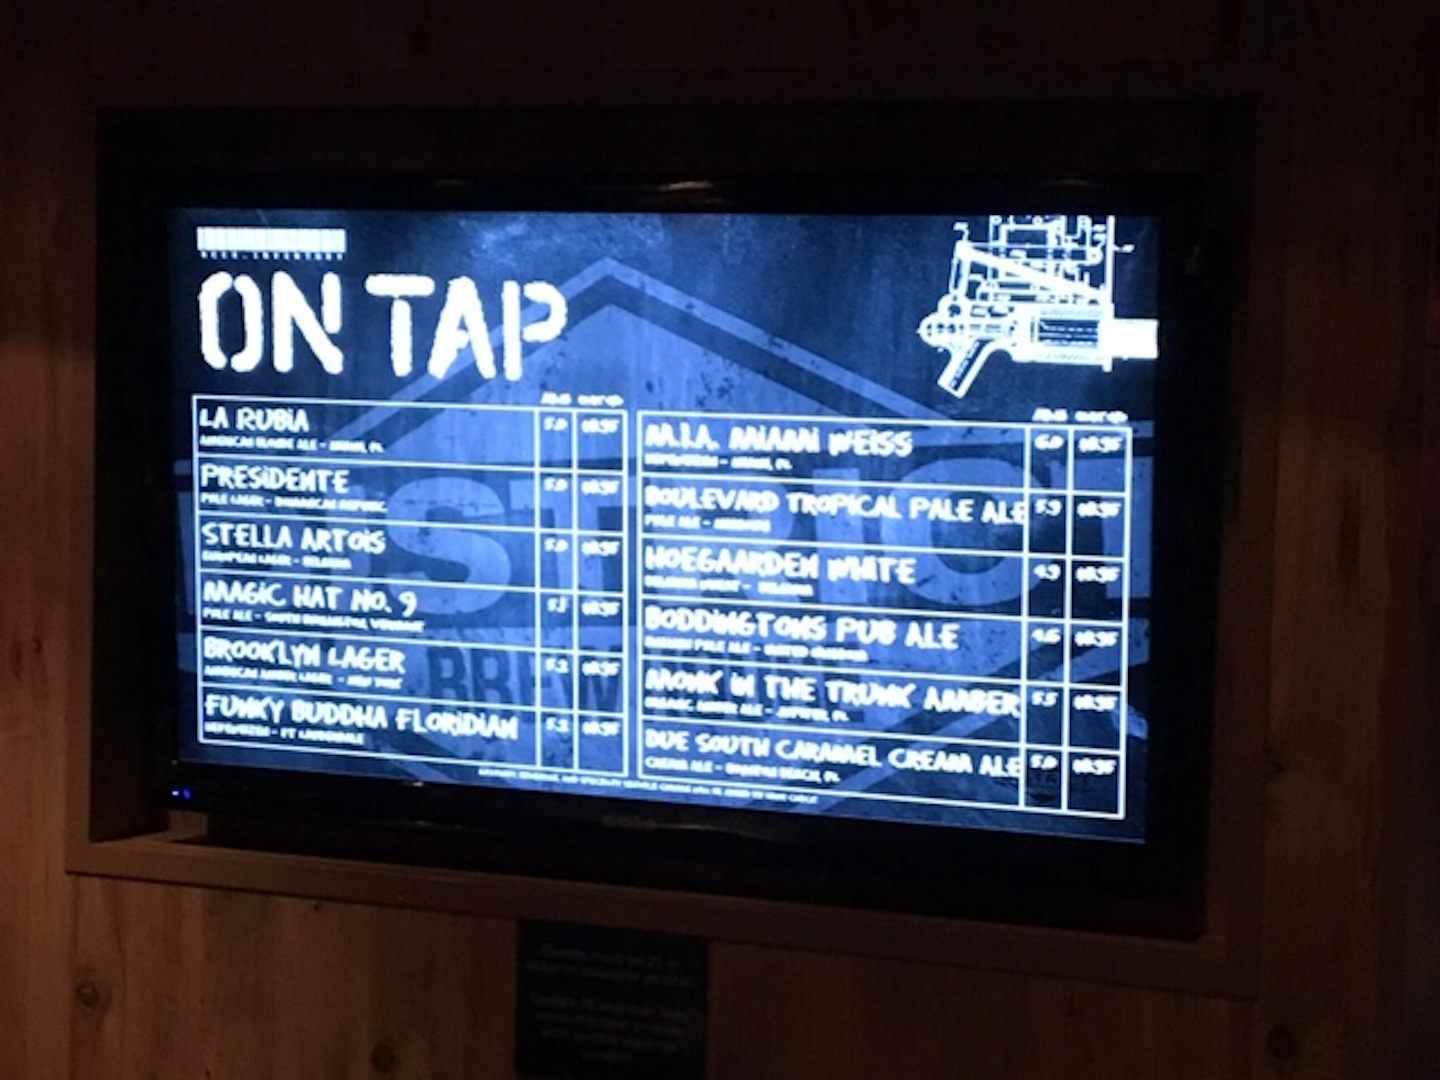 Check out the Florida Beers!